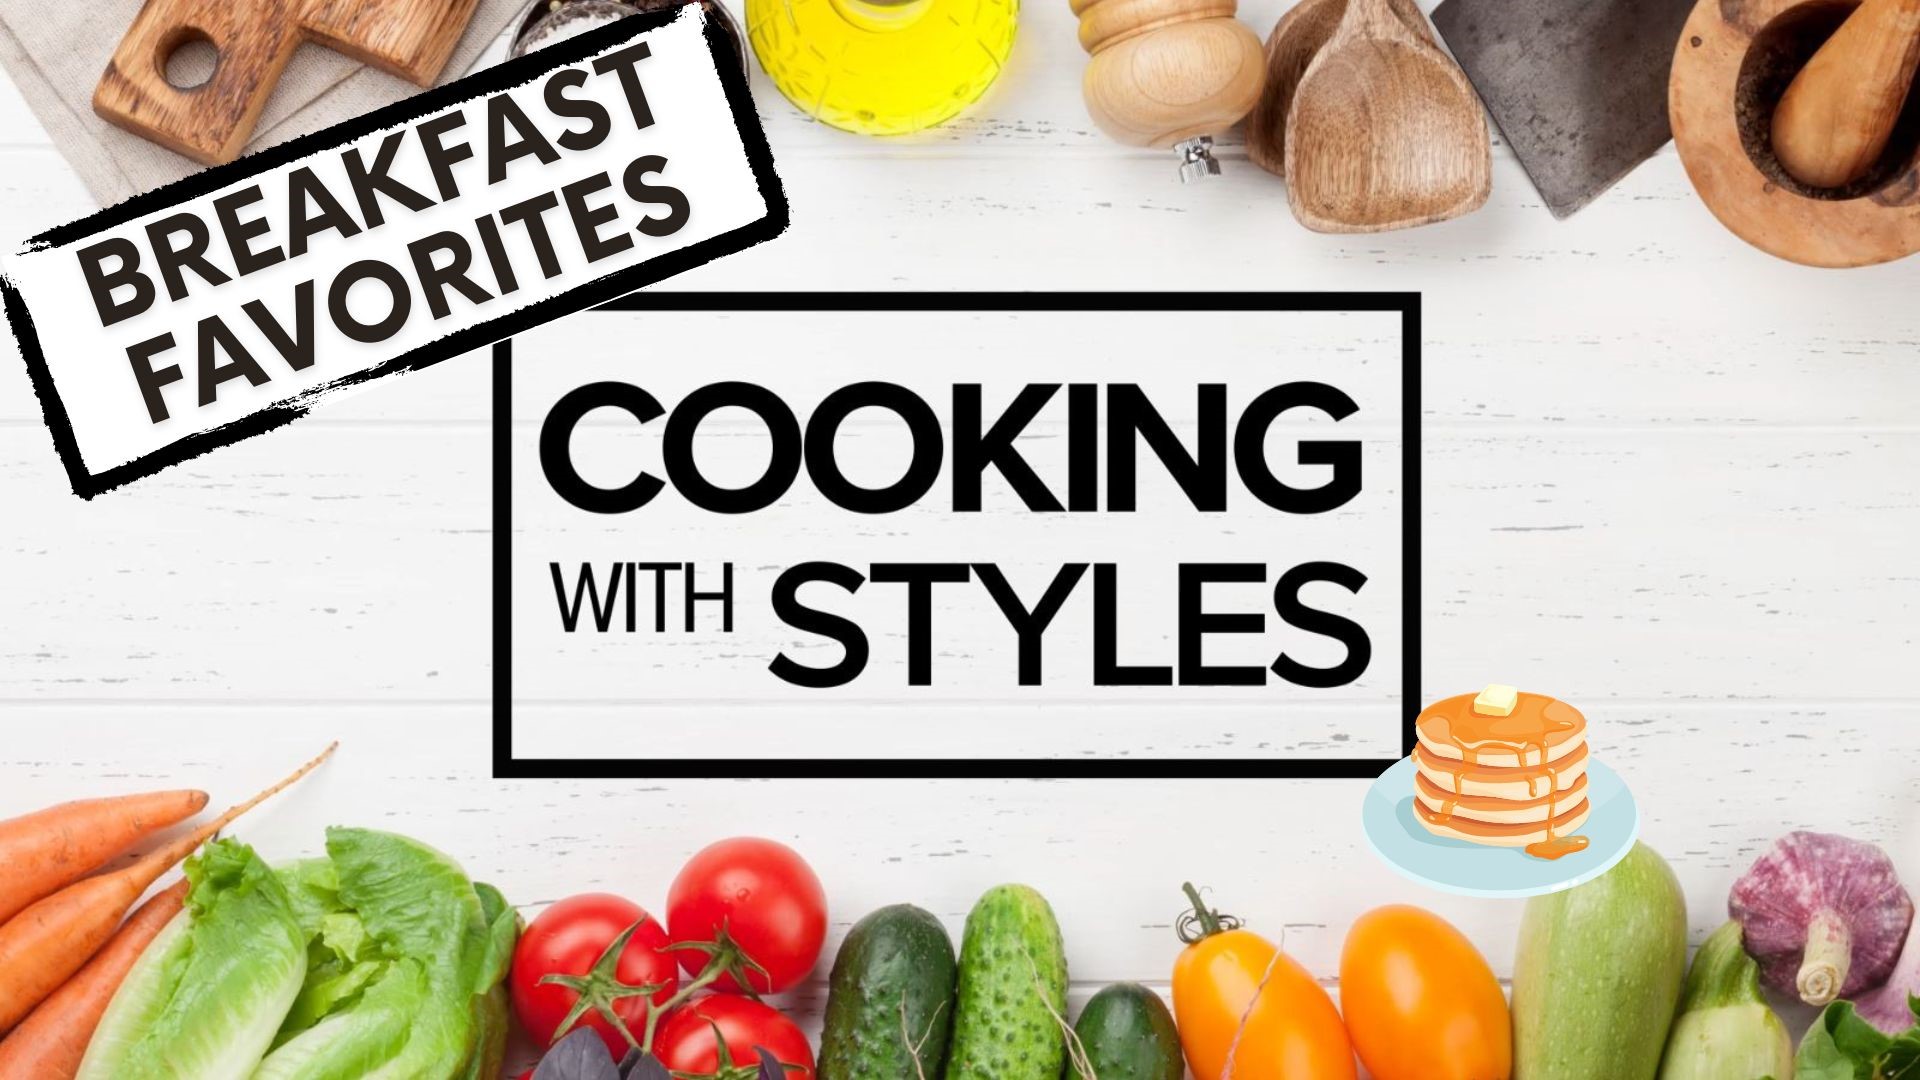 KFMB's Shawn Styles shares some recipes for classic breakfast foods including biscuits and gravy, omelets and more.